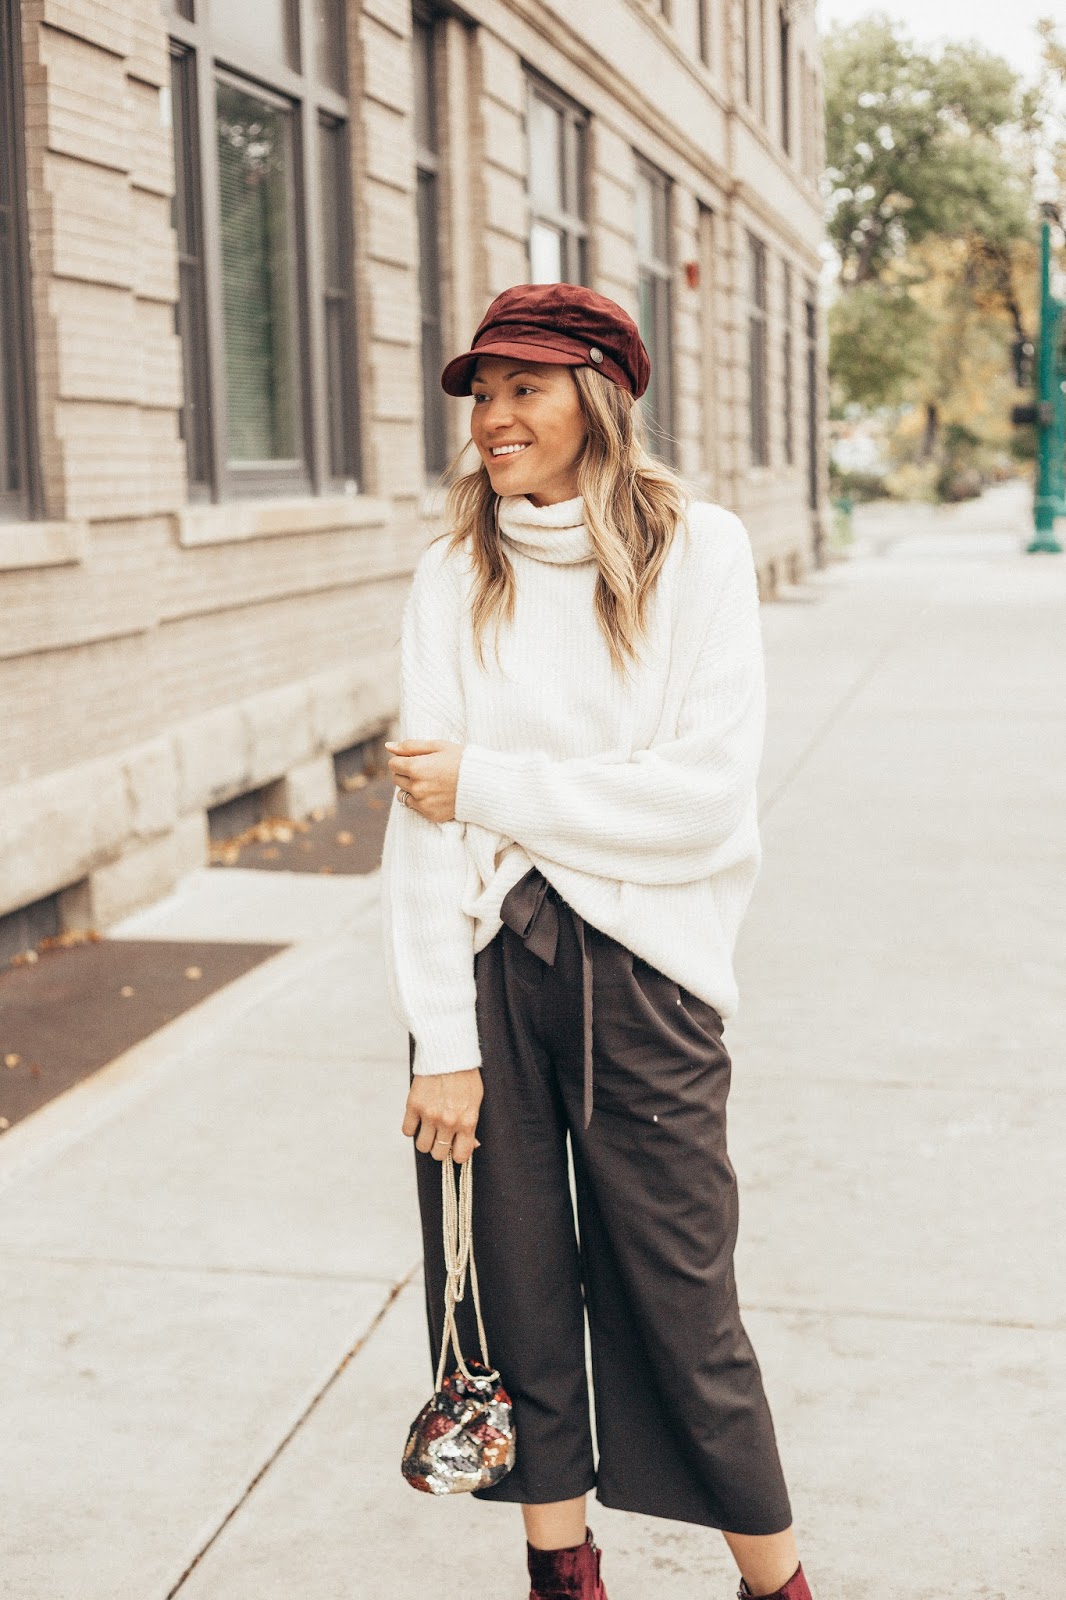 5 Trendy Fall Hats You Should Own by Colorado fashion blogger Eat Pray Wear Love